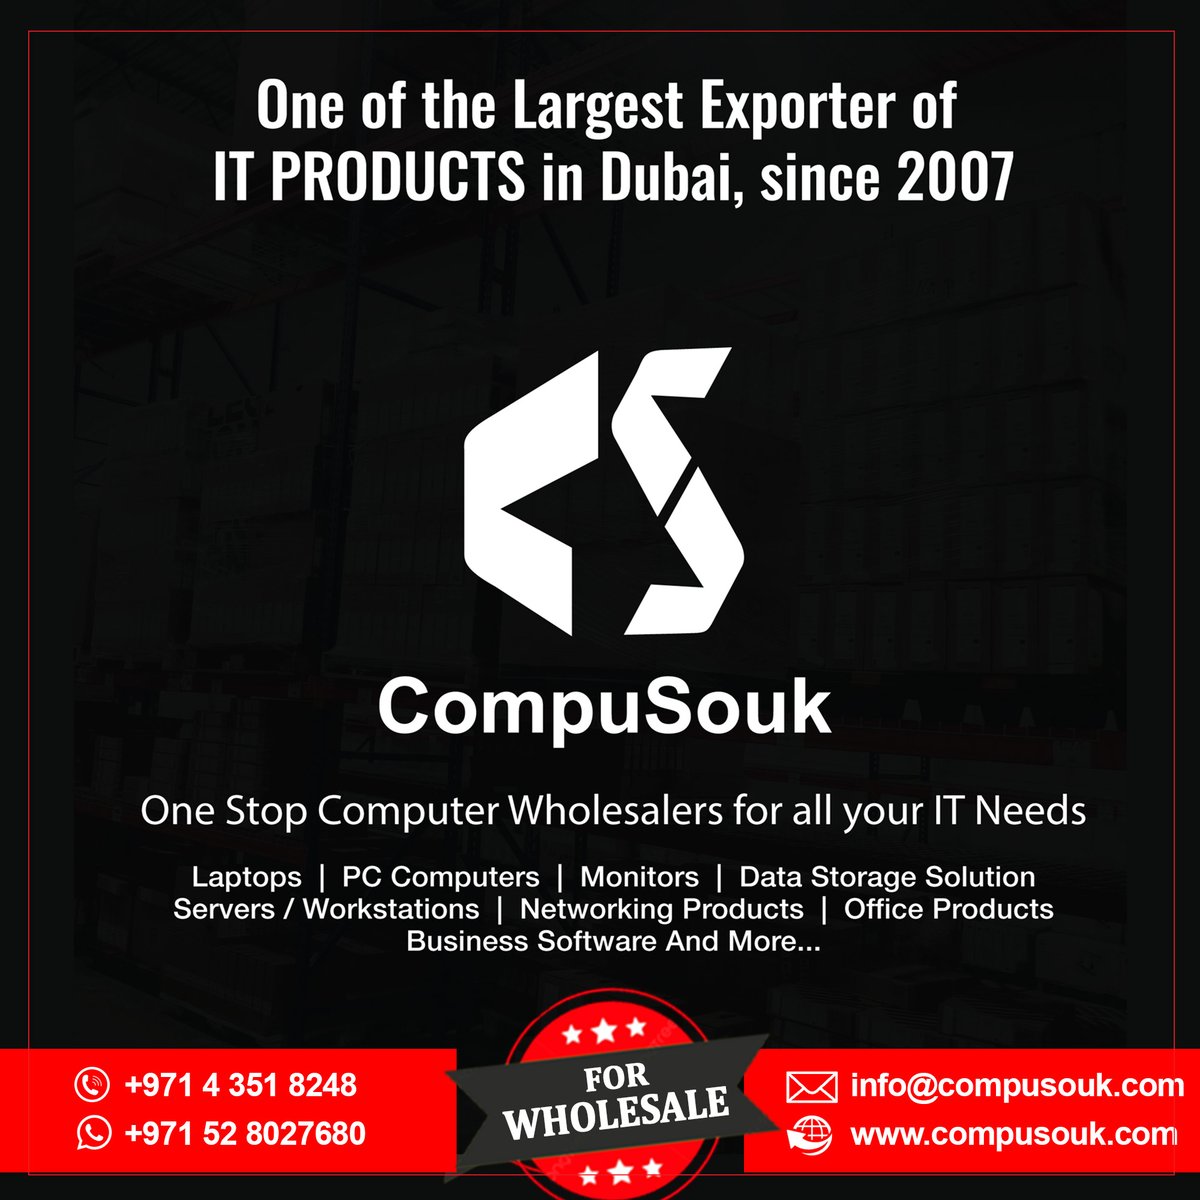 Feel free to connect to the Largest #Exporter of #ITProducts for your any requirements.

Shipping Worldwide
Call:☑️ +971 4 351 8248 ☑️ Whatsapp : +971 52 8027680 ☑️ Email: info@compusouk.com

#Compusouk #ComputerHardwaresales #Computerdealer #LaptopsDealer #HardwareWholesale